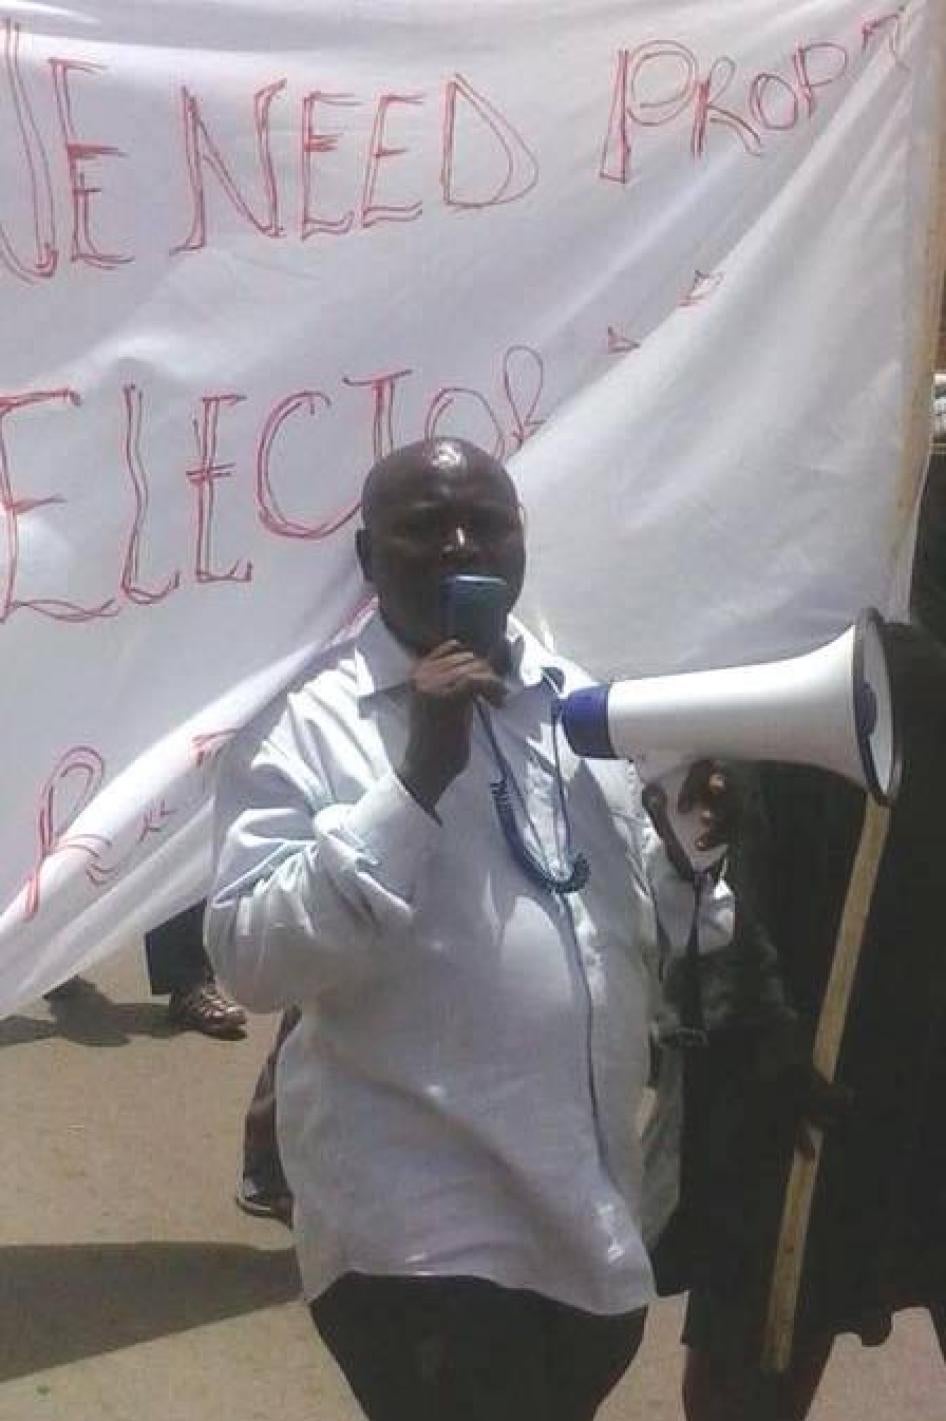 Opposition activist Solo Sandeng at an April 14, 2016 protest for electoral reform in Serrekunda, a suburb of Banjul. Gambian police officers broke up the protest and arrested Sandeng, who was subsequently beaten to death in state custody.